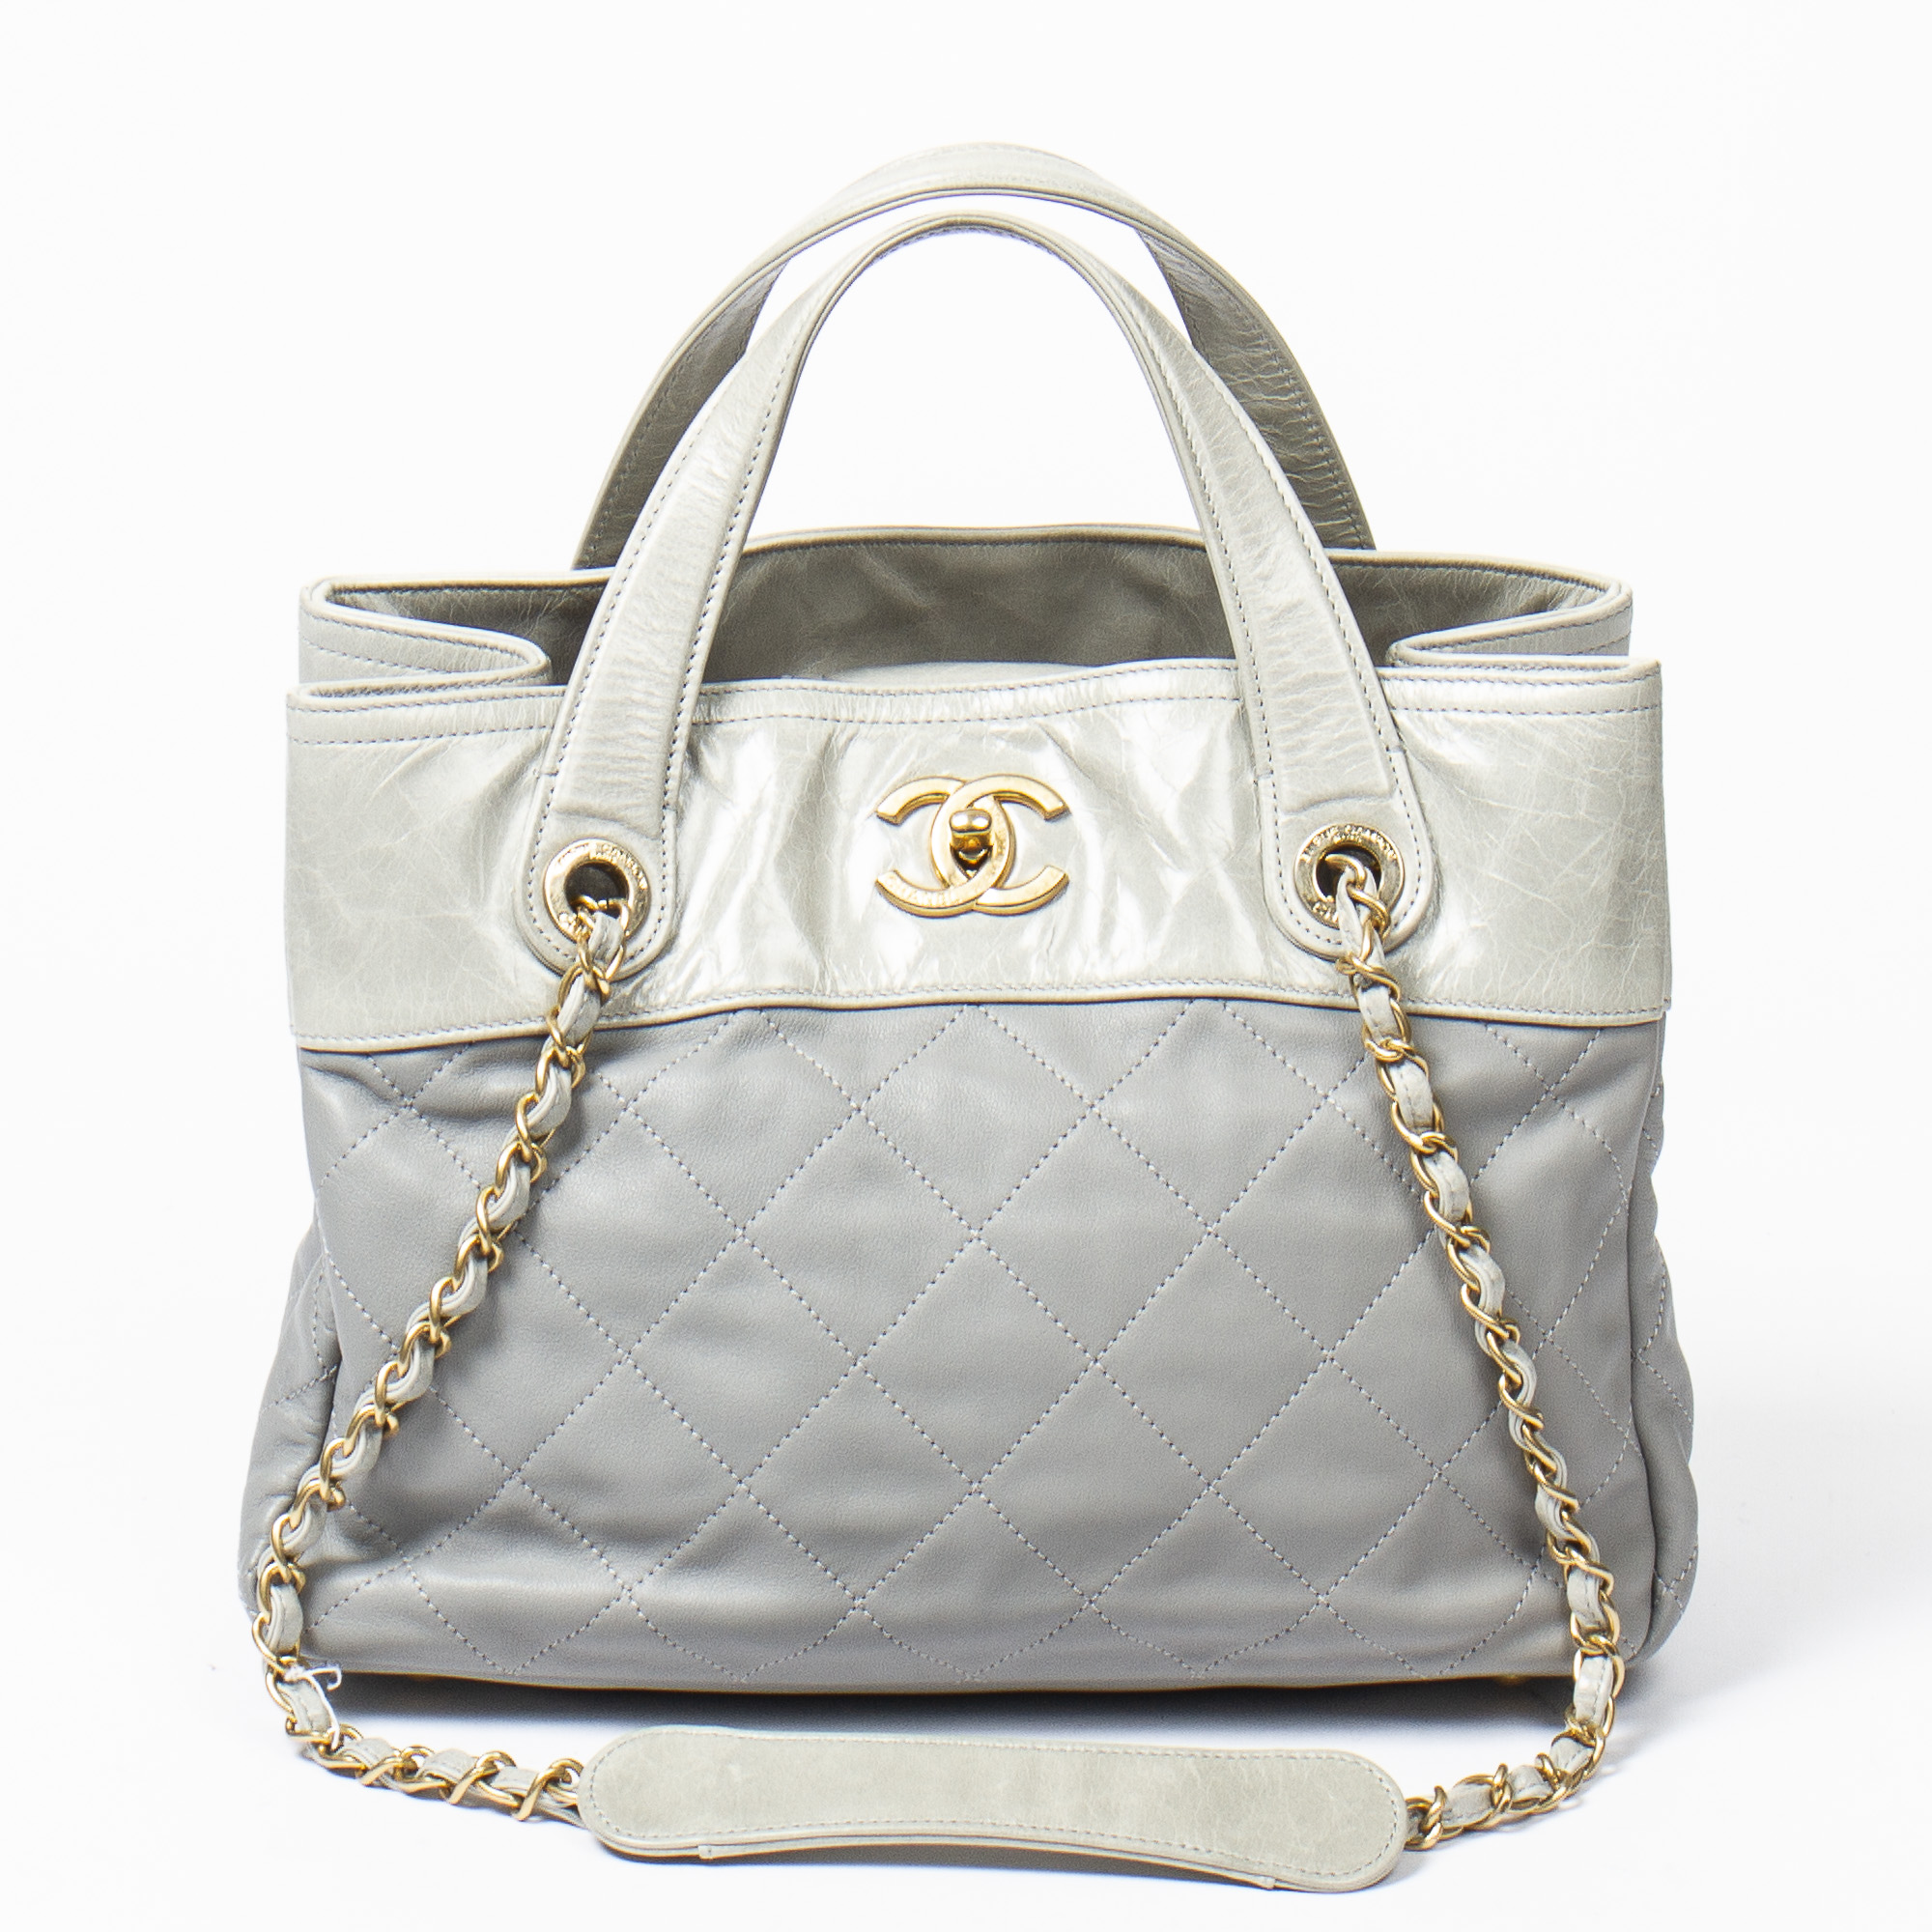 Michael Kors Voyager East West Logo Signature Tote Bag Pale Grey White NWT  $298